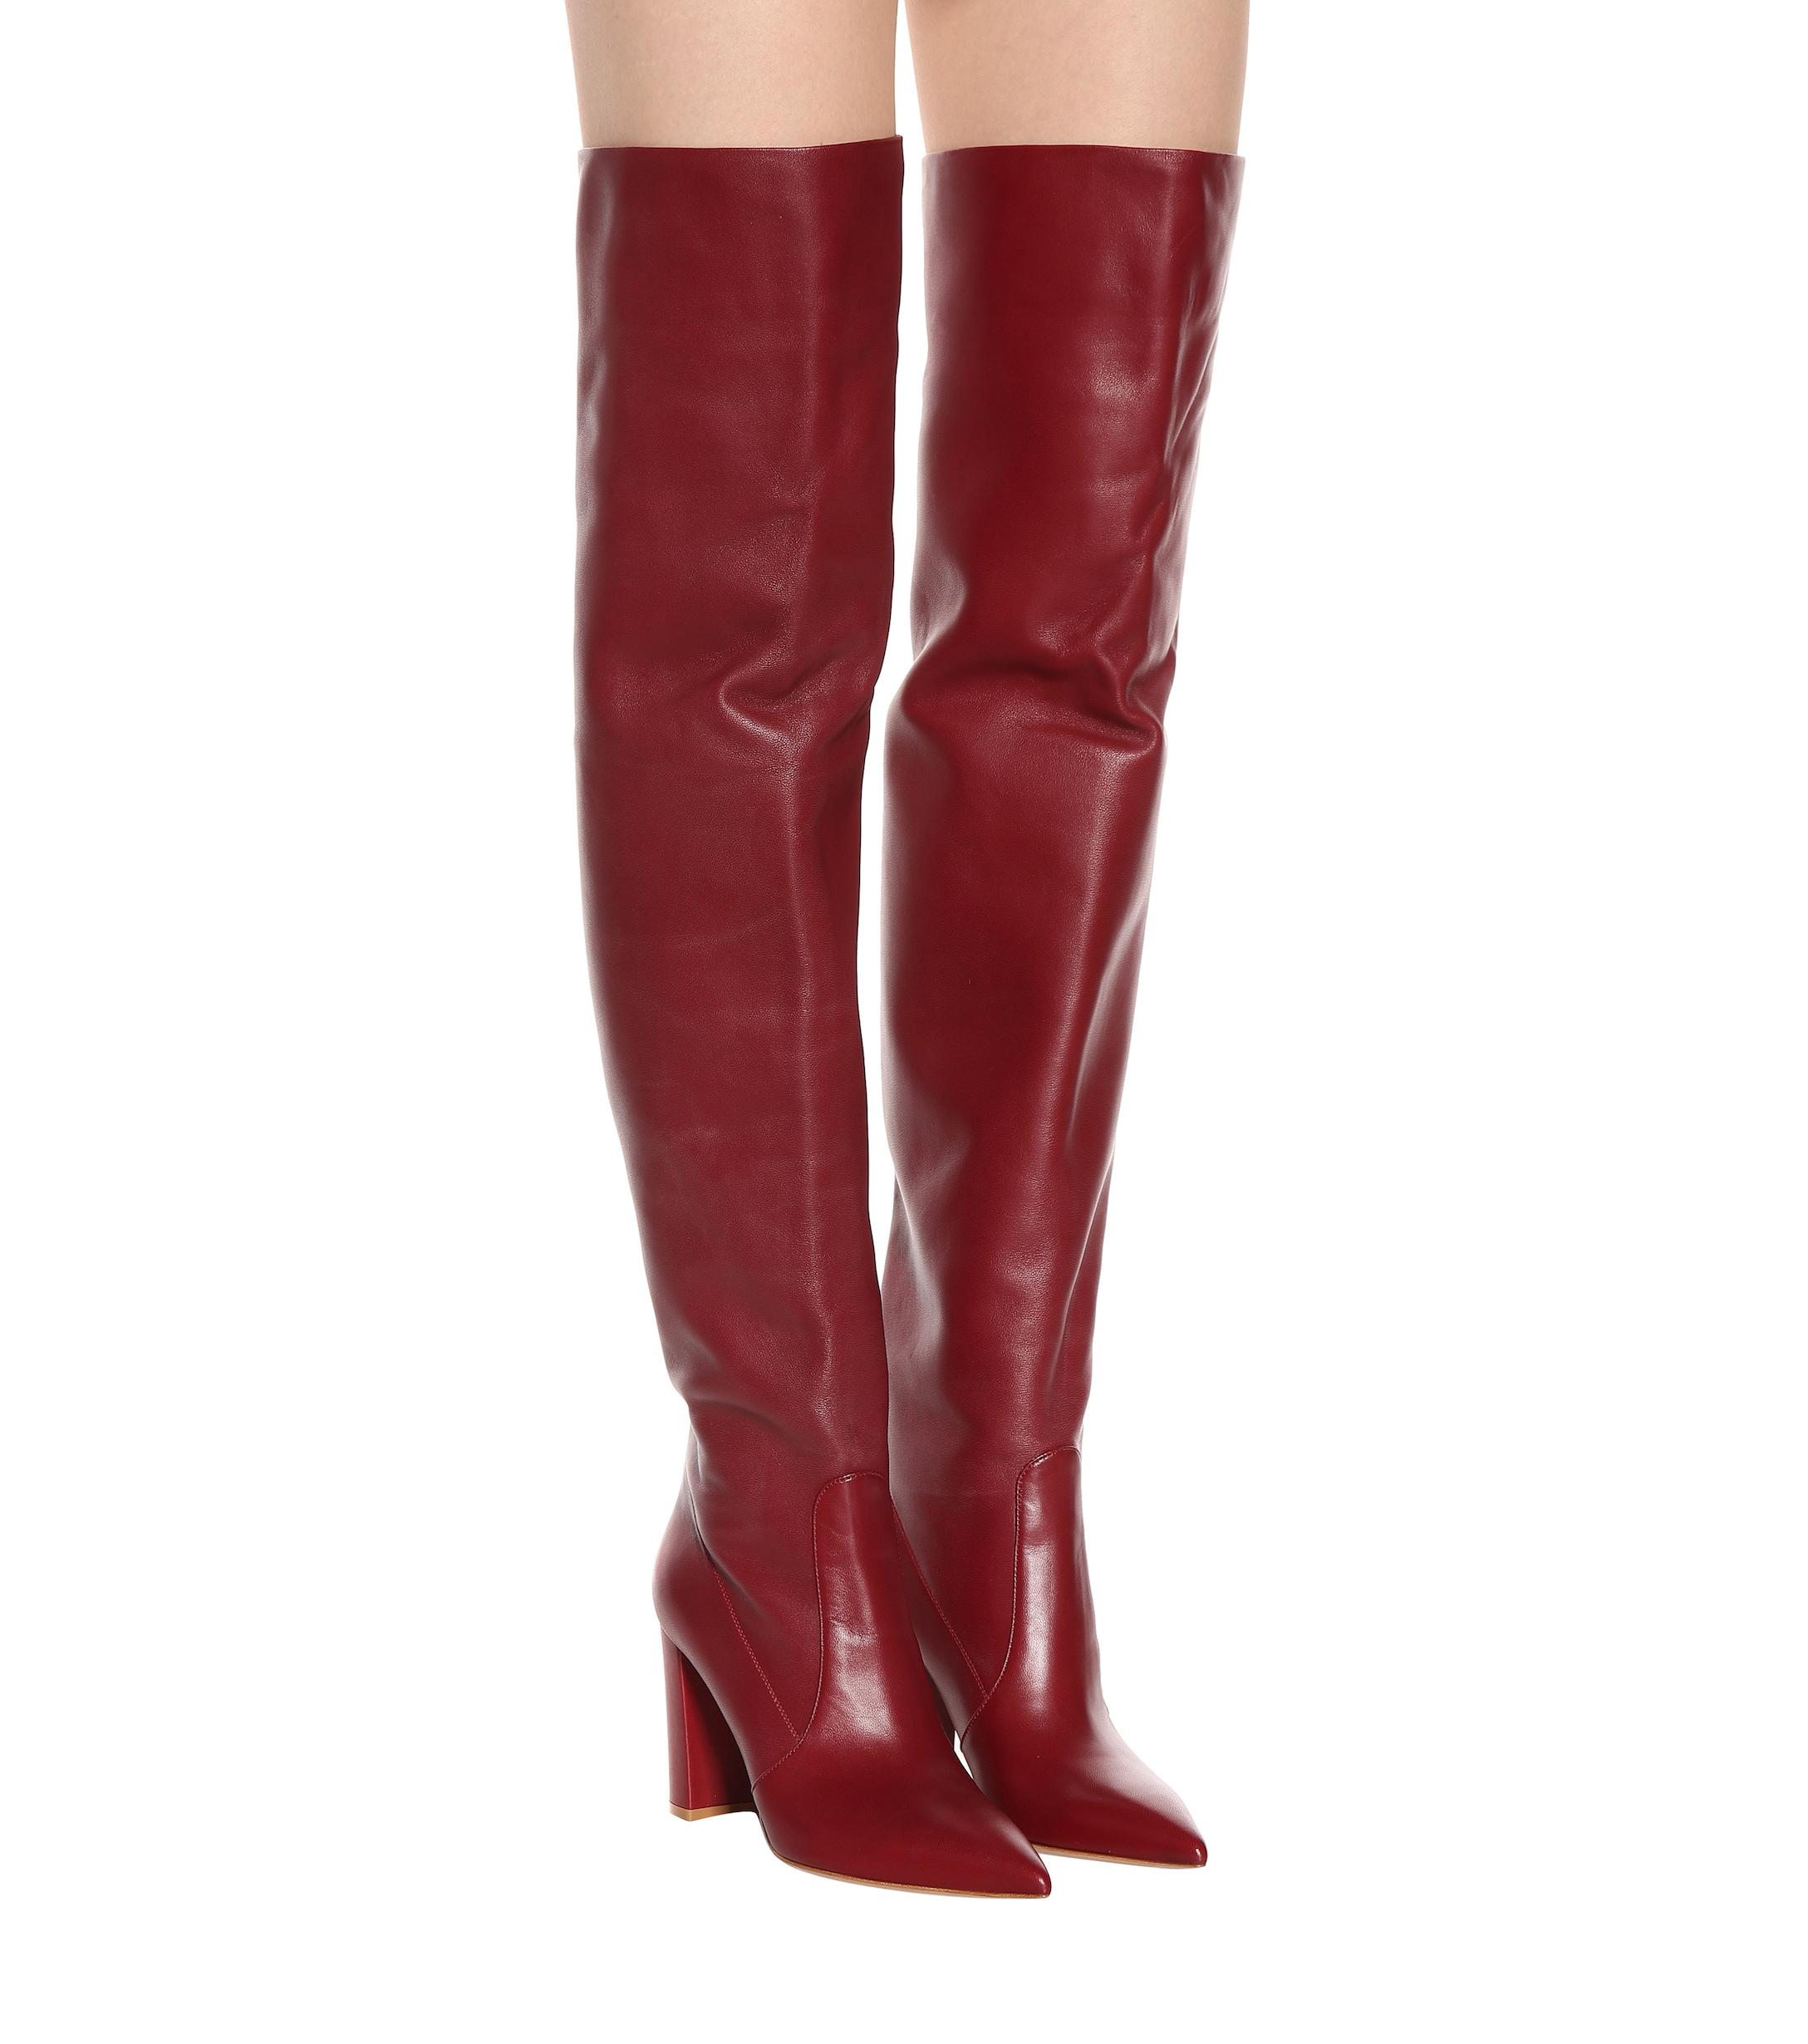 Gianvito Rossi Morgan 85 Over-the-knee Boots in Red | Lyst Australia